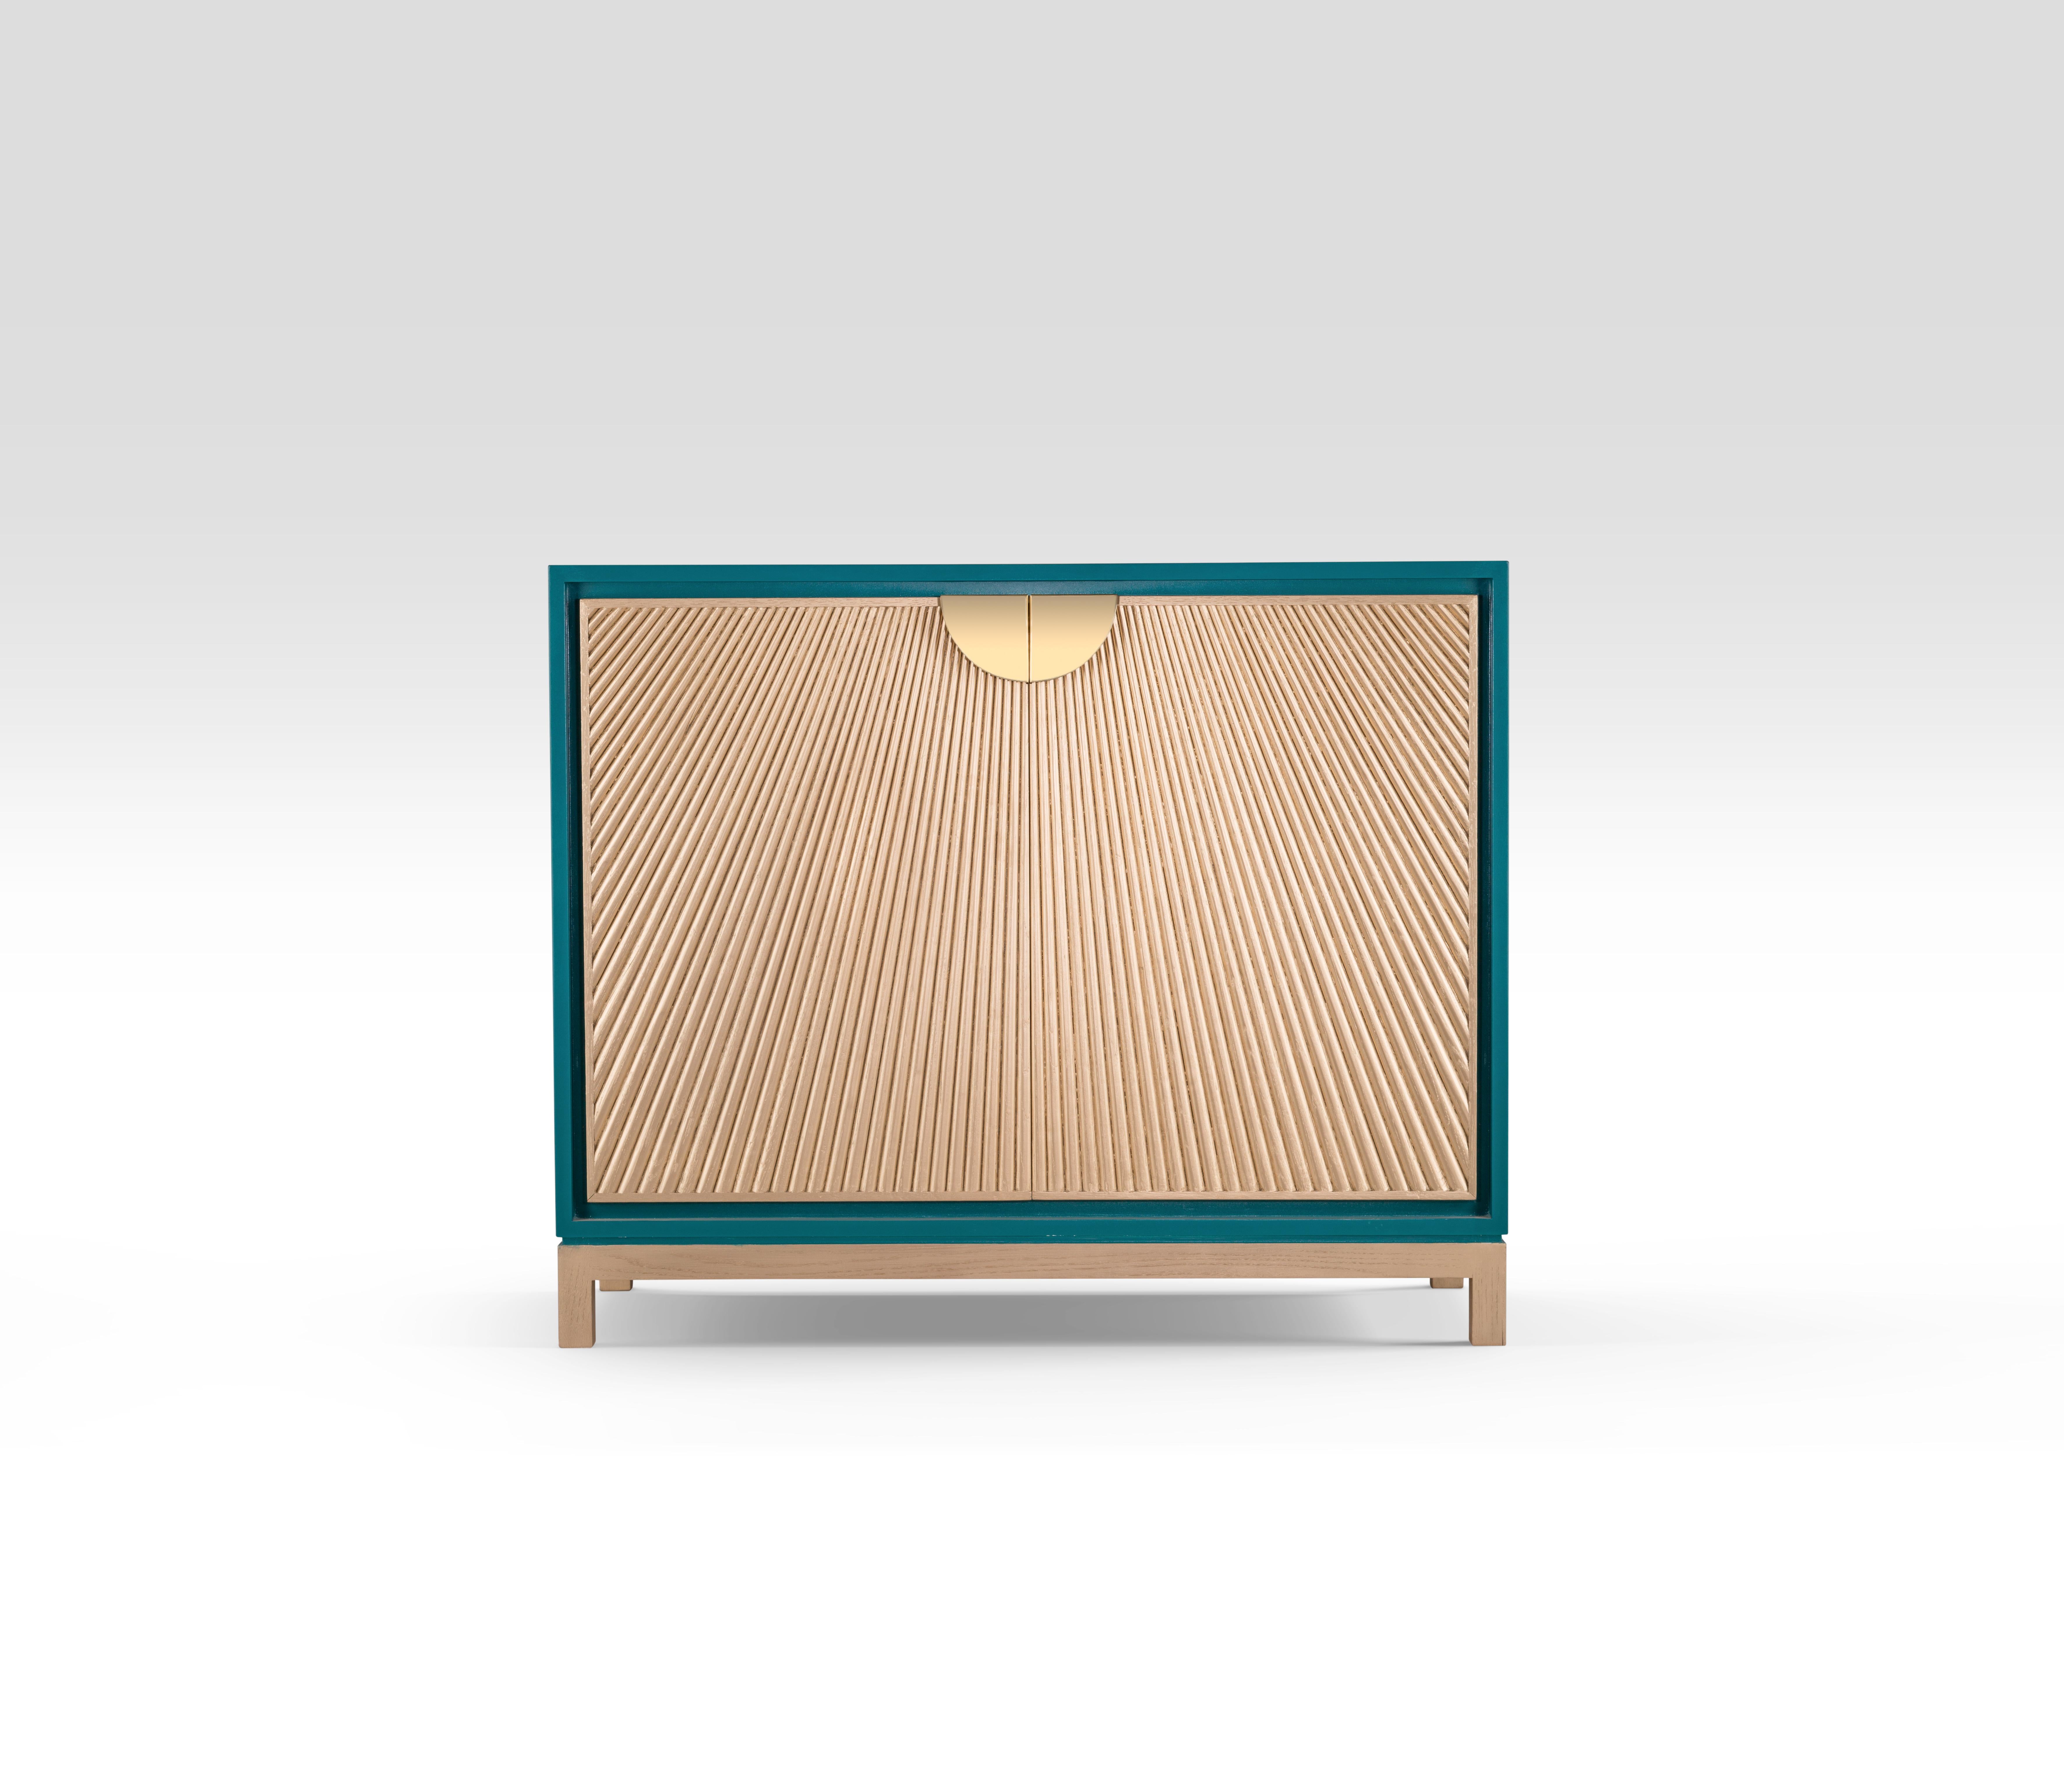 Cabinet with Radiating Silver-Stained Oak Sticks Within a White Lacquered Wood Body. 
Our Sun Rays cabinet is an embodiment of the Ancient Egyptian symbol of energy, force and rebirth. Inspired from the sun rays manifested on temples walls, the